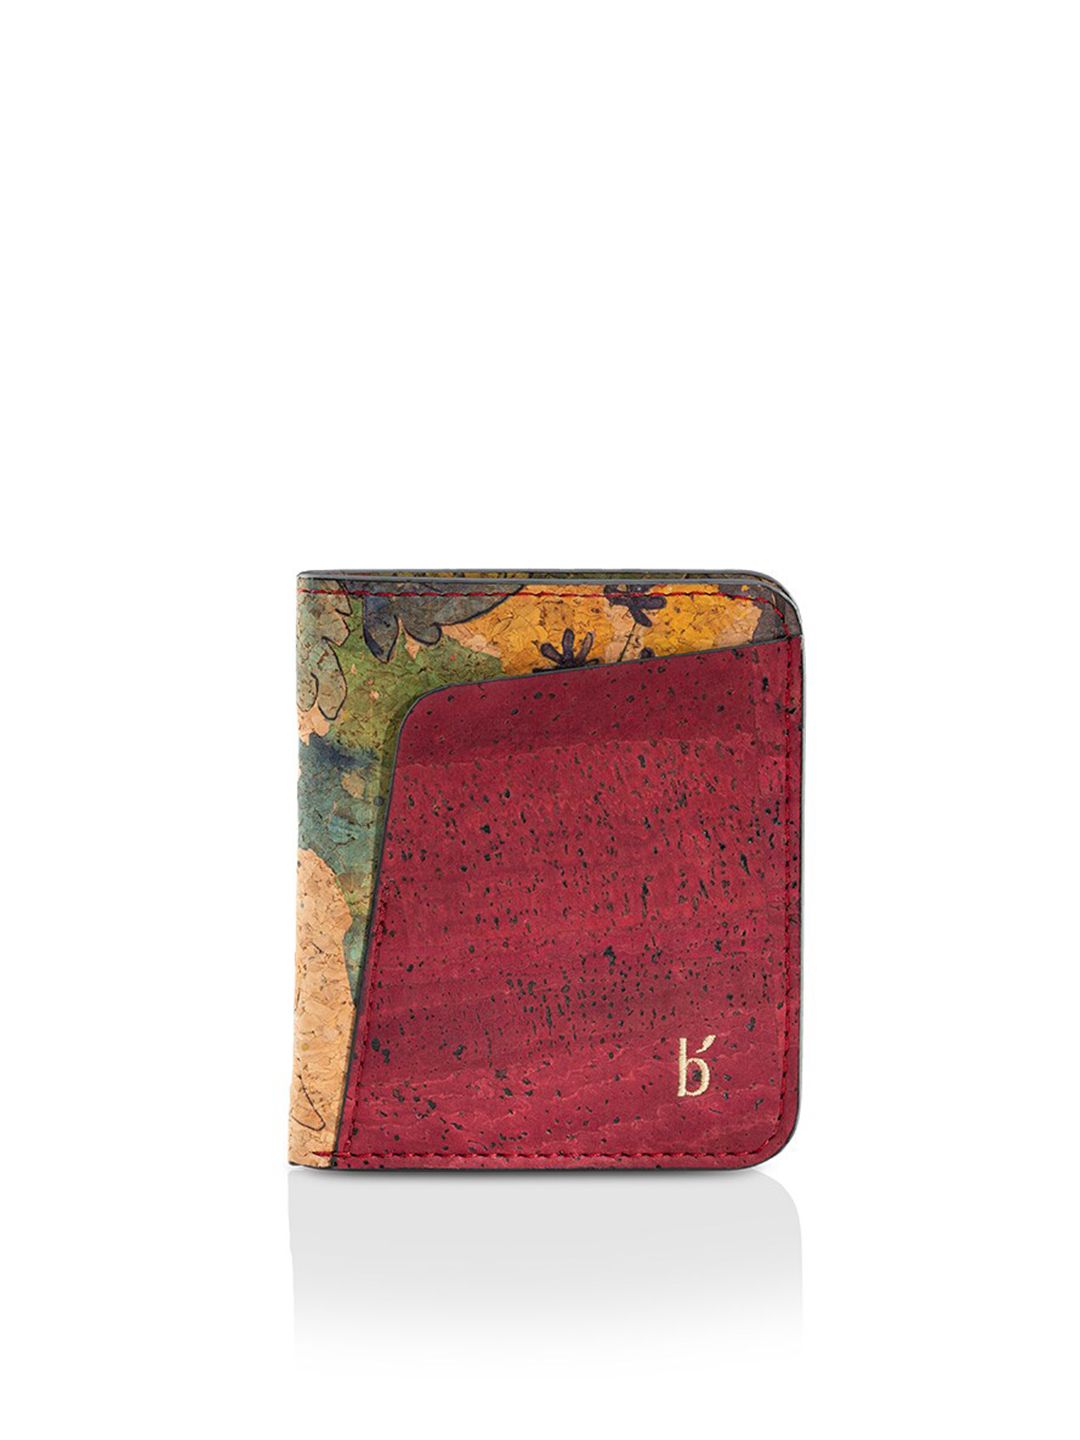 Beej Unisex Red & Green Textured Two Fold Wallet Price in India